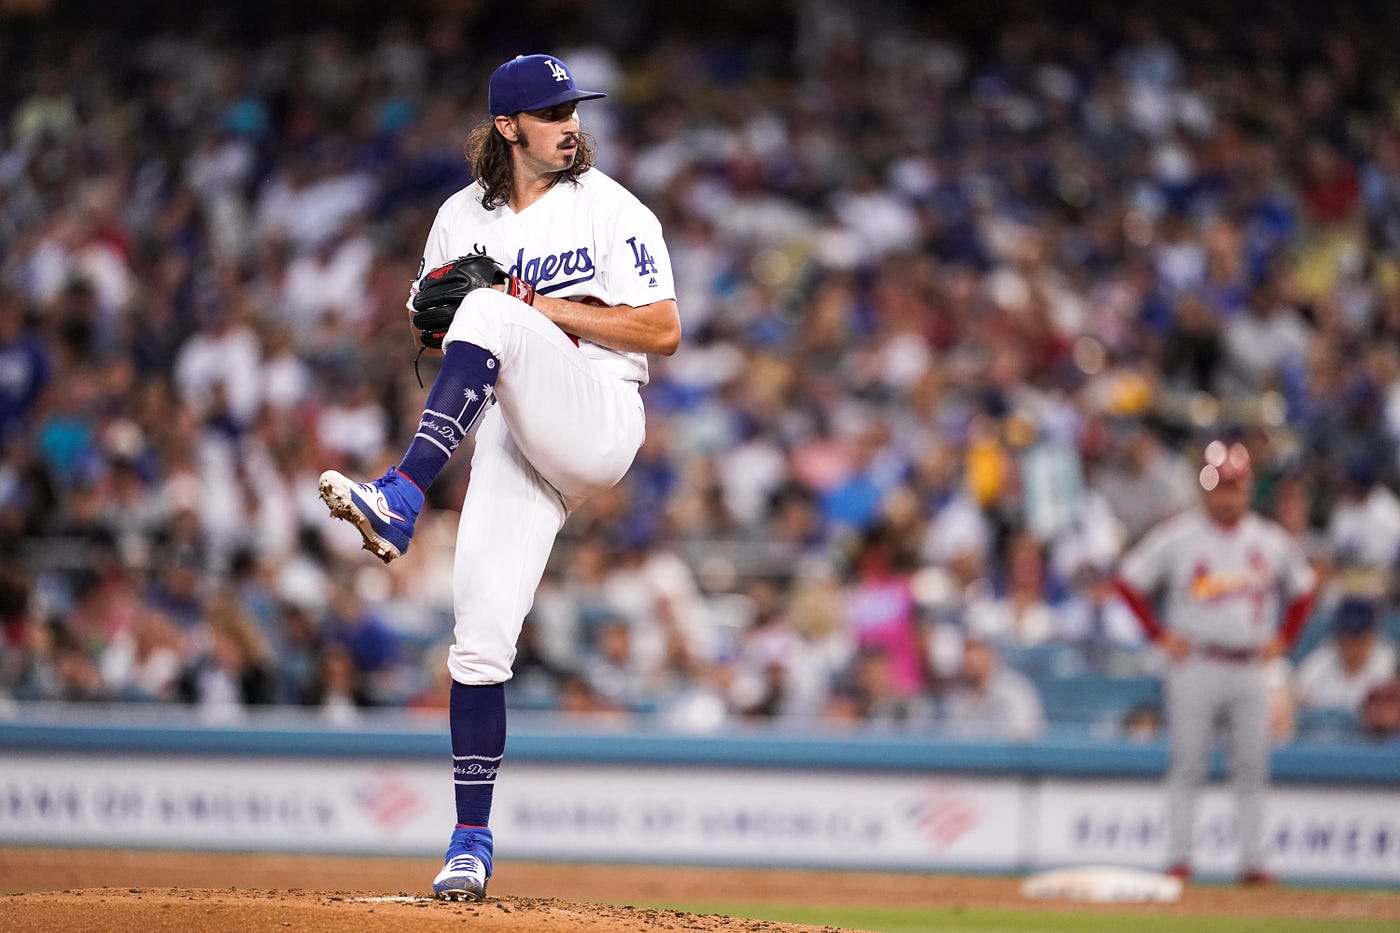 40-man breakdown: Tony Gonsolin. Right-hander and Dodgers' №6 prospect…, by Cary Osborne